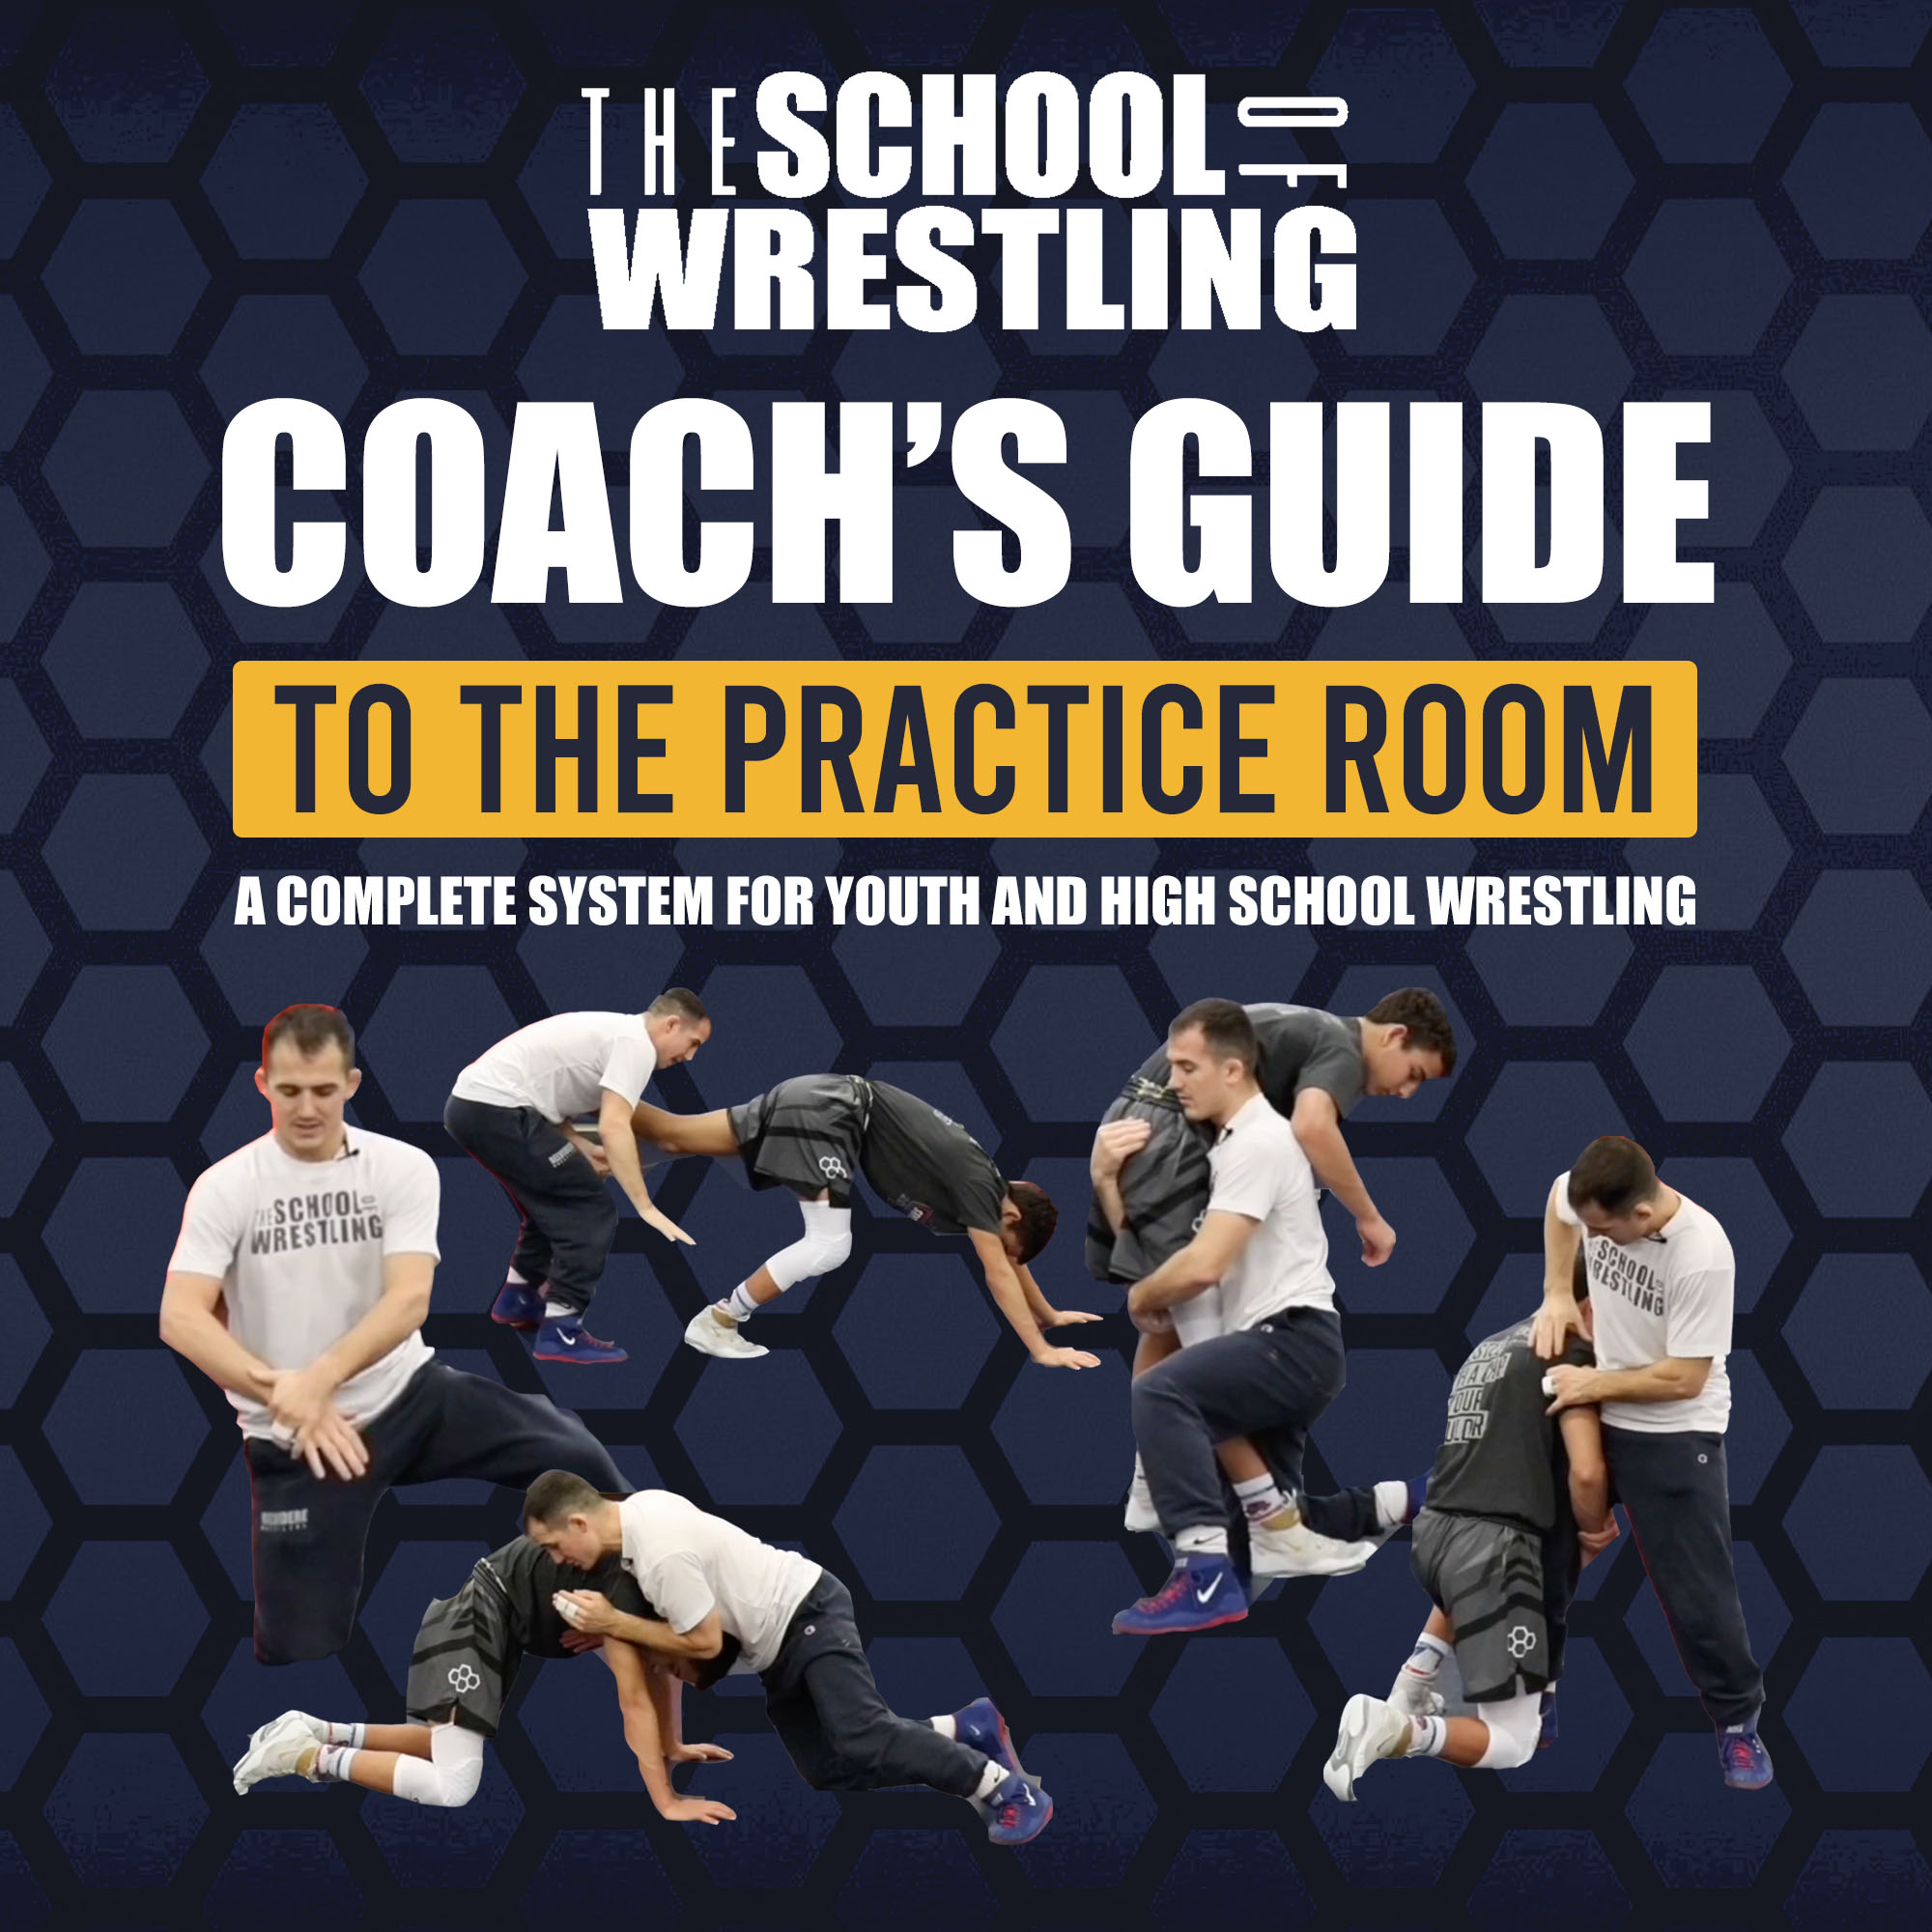 Coach's Guide To The Practice Room Online Course